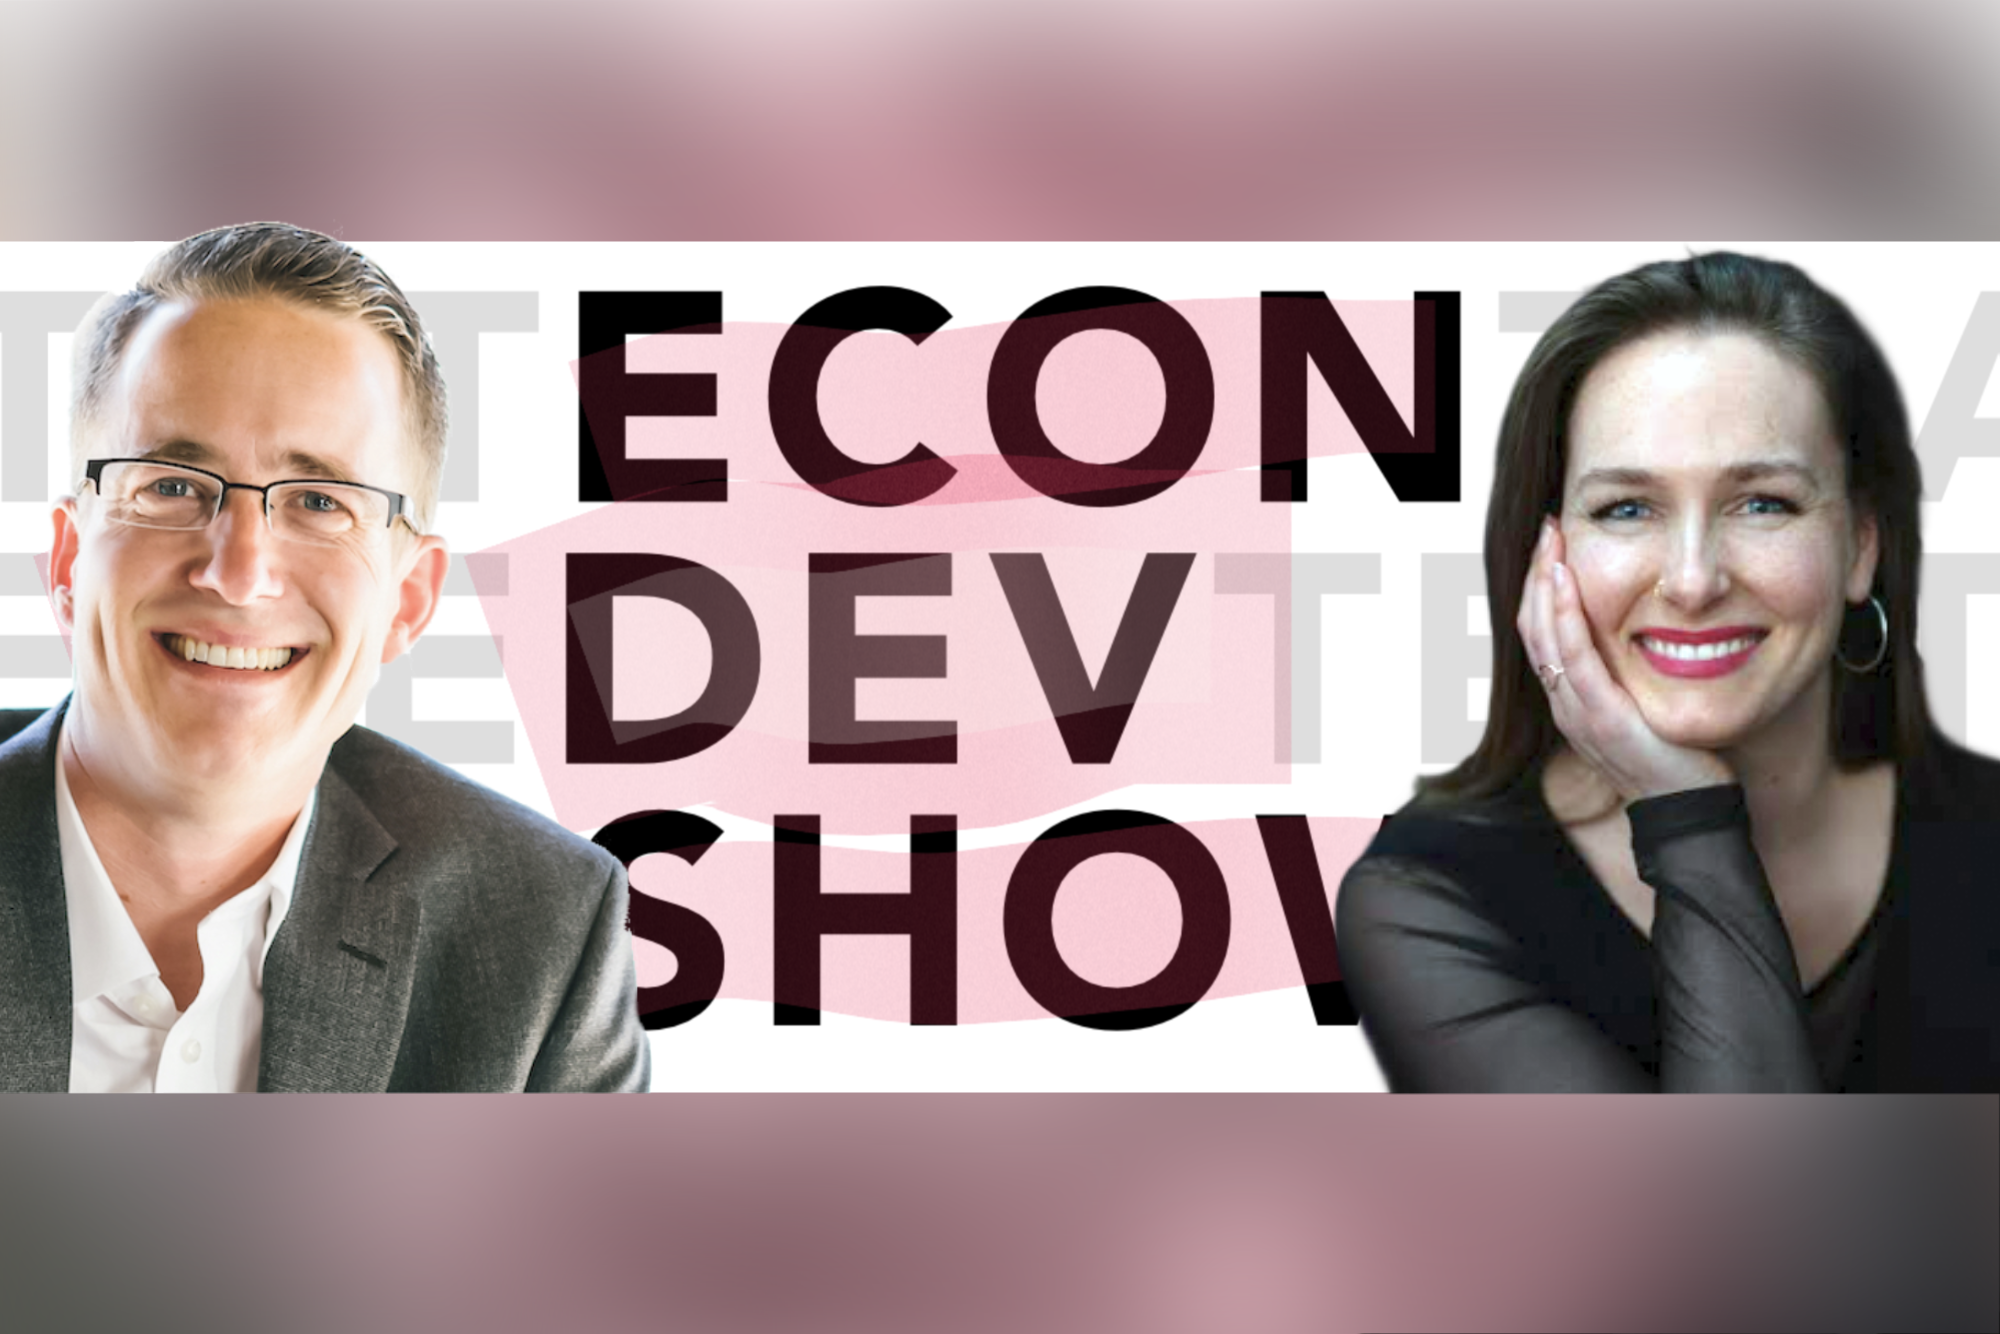 Podcast Episode # 128: Empowering Rural Communities with Juliana Dodson